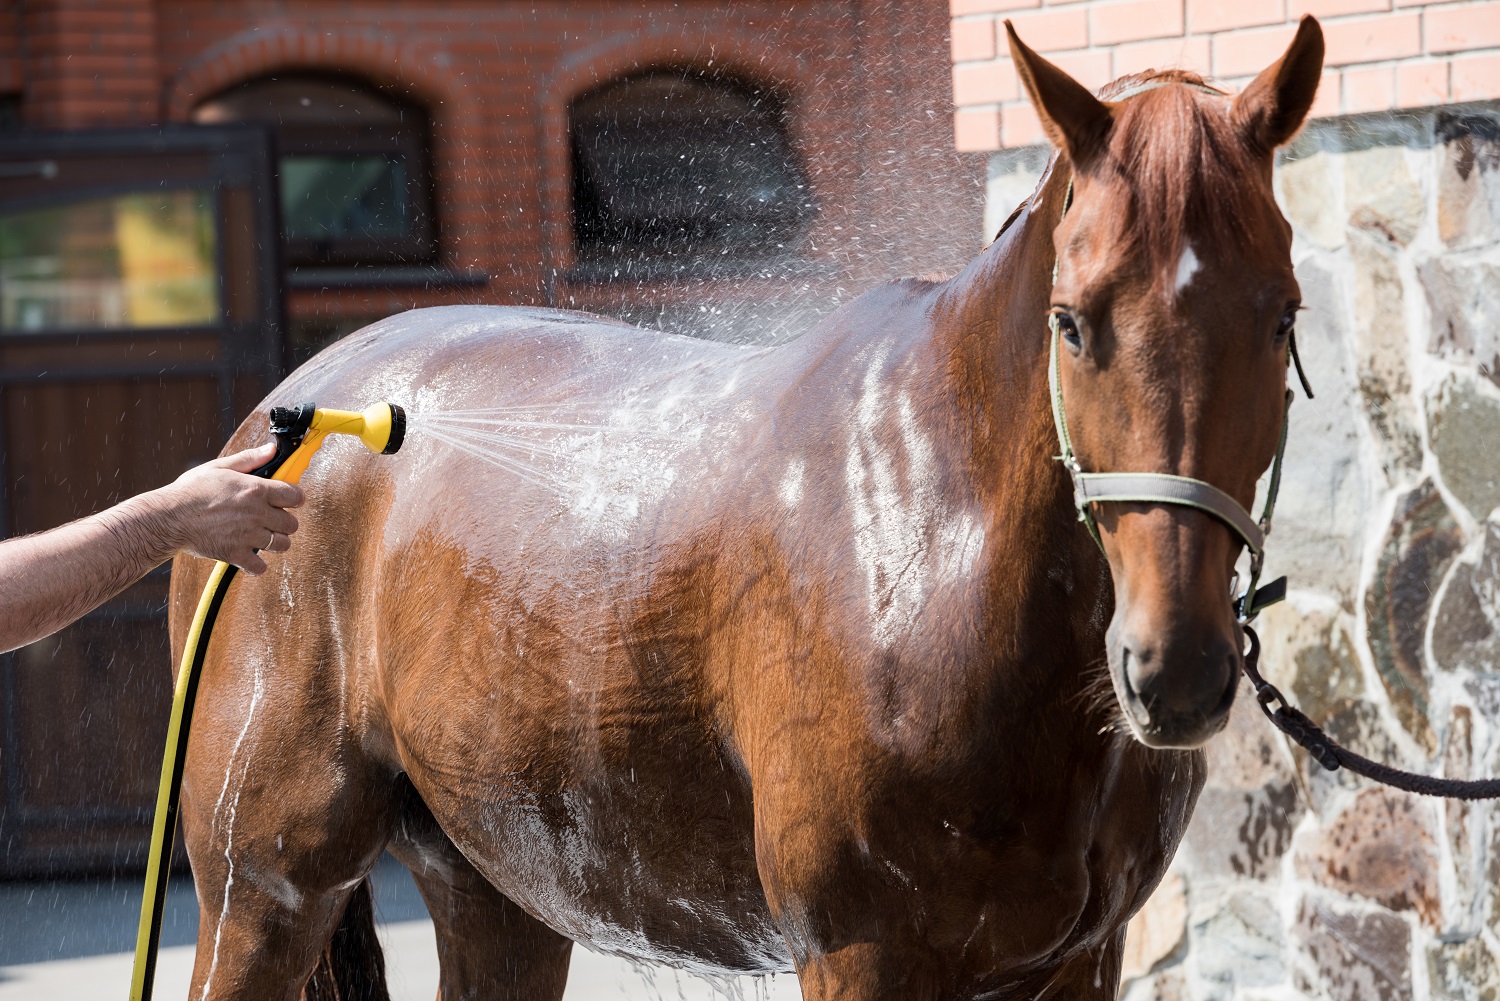 bathing your horse: a guide